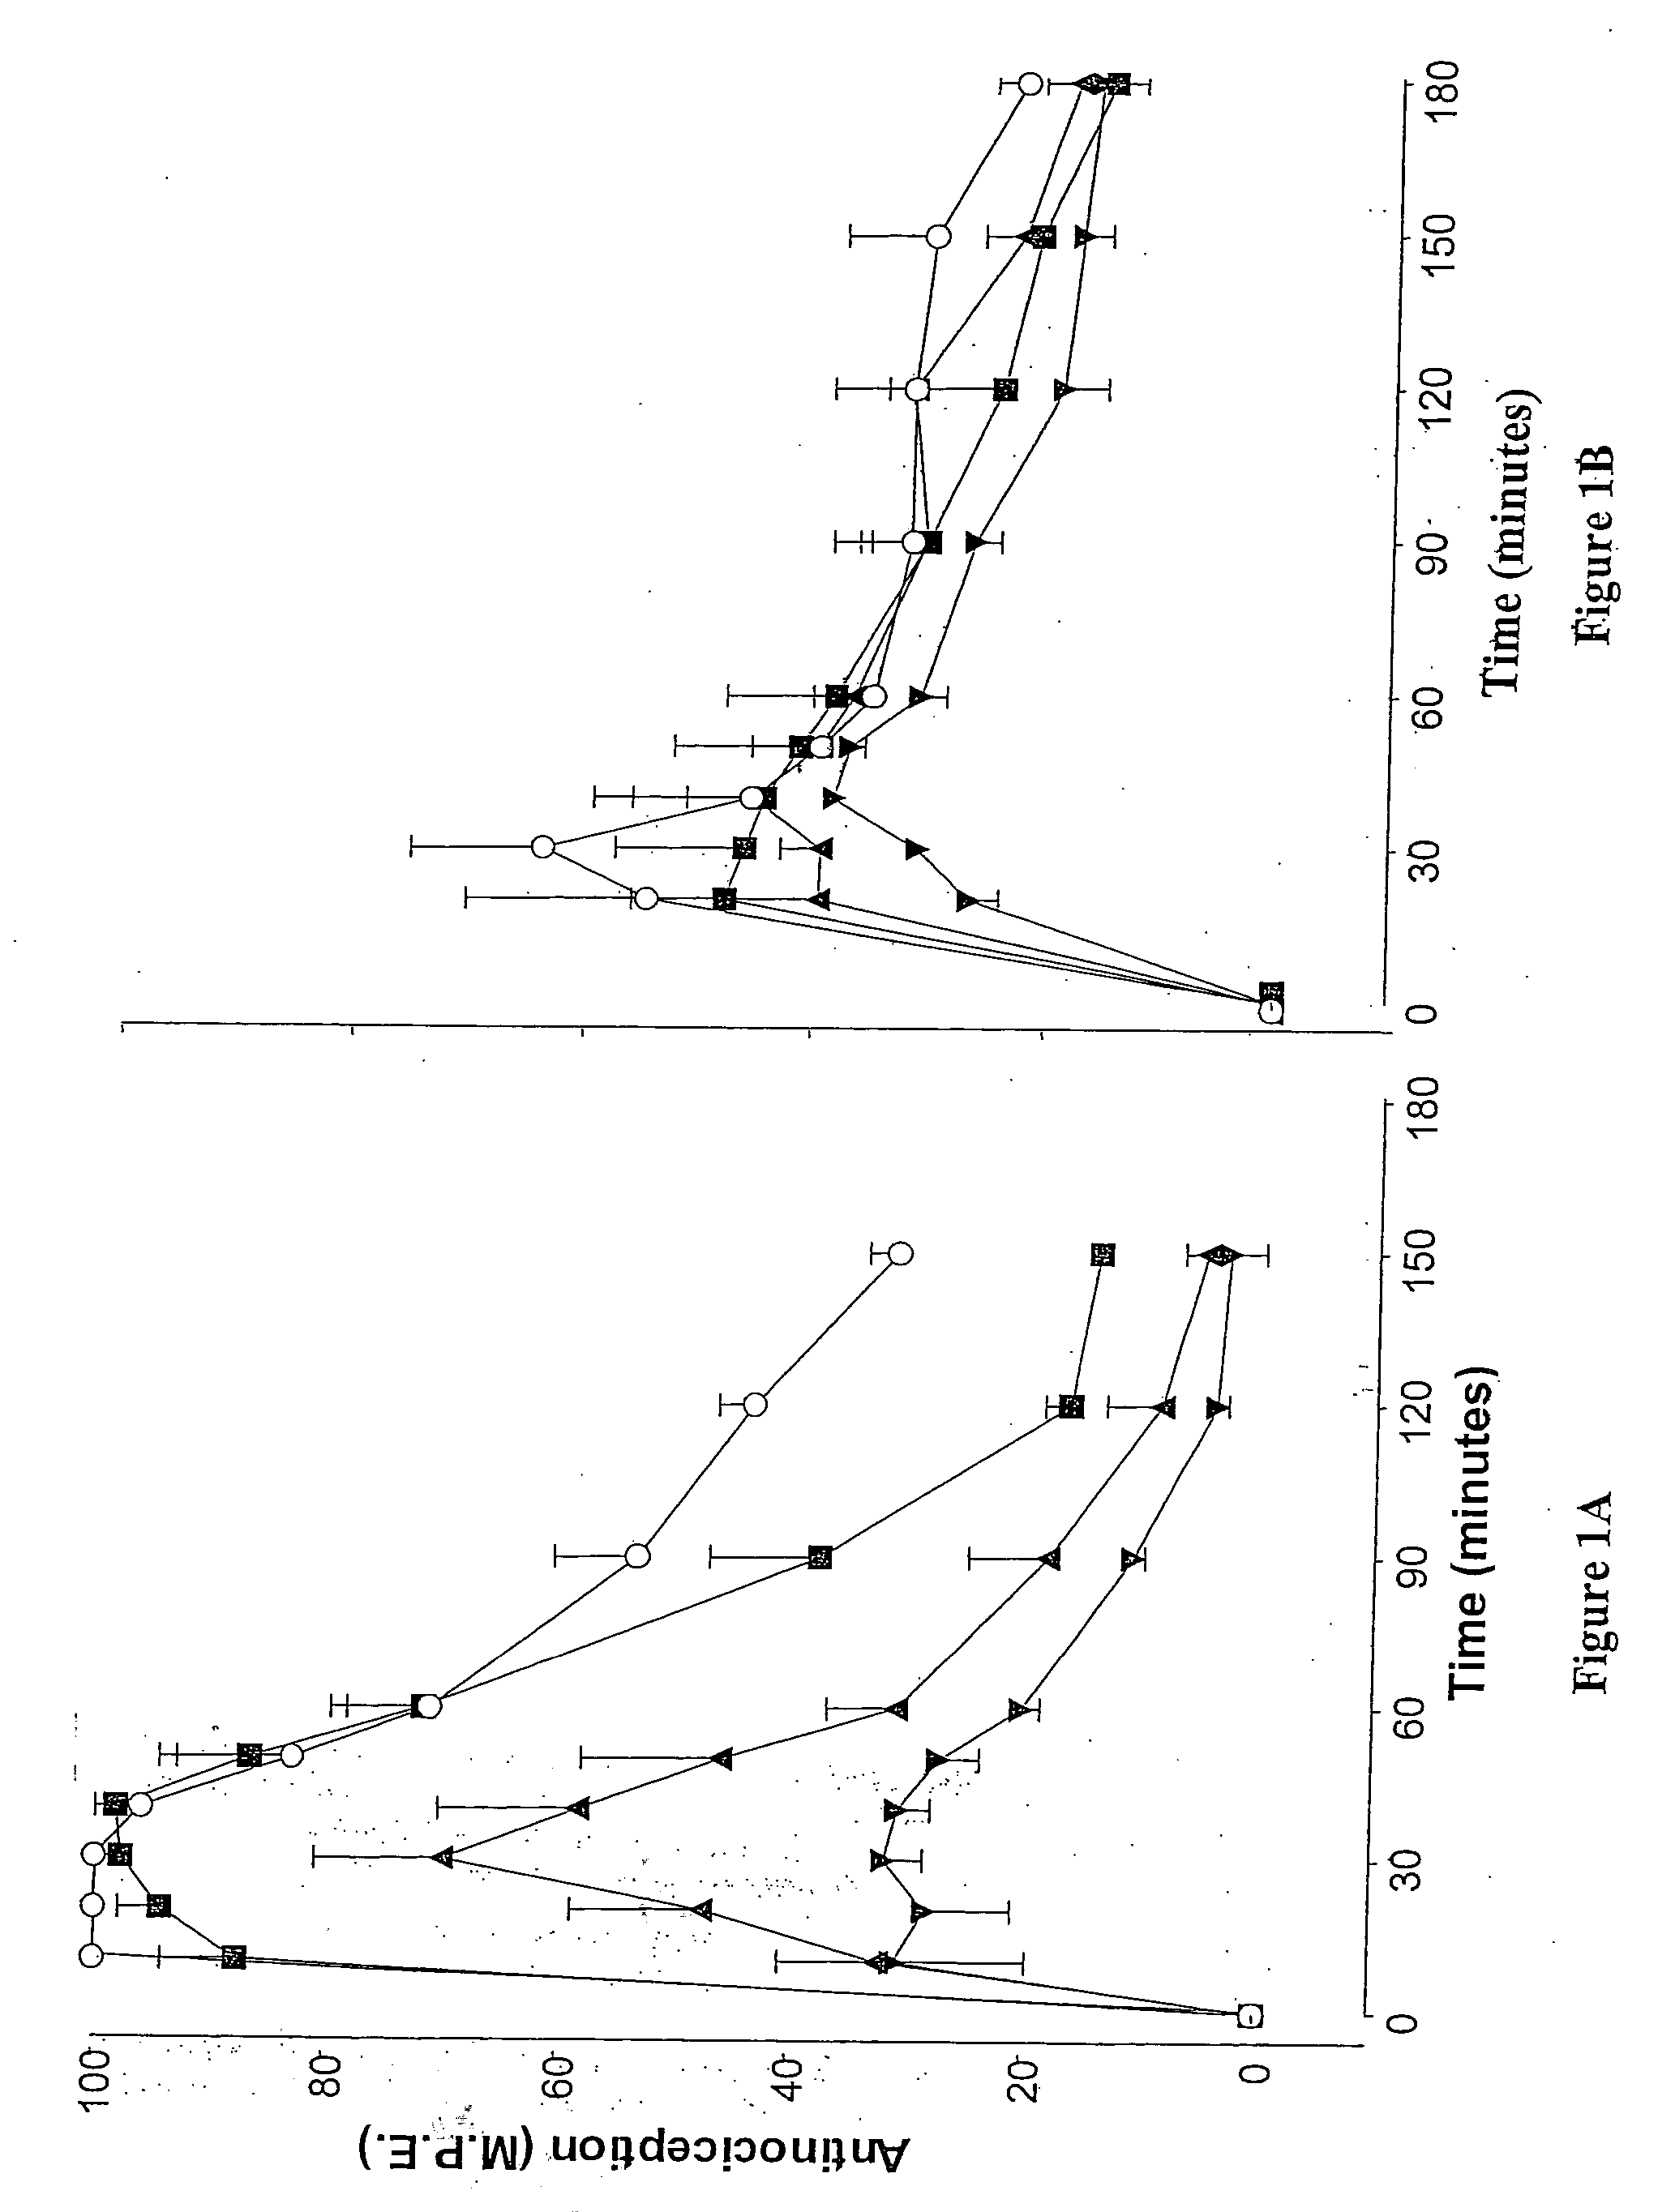 Methods and therapies for potentiating a therapeutic action of an opioid receptor agonist and inhibiting and/or reversing tolerance to opioid receptor agonists